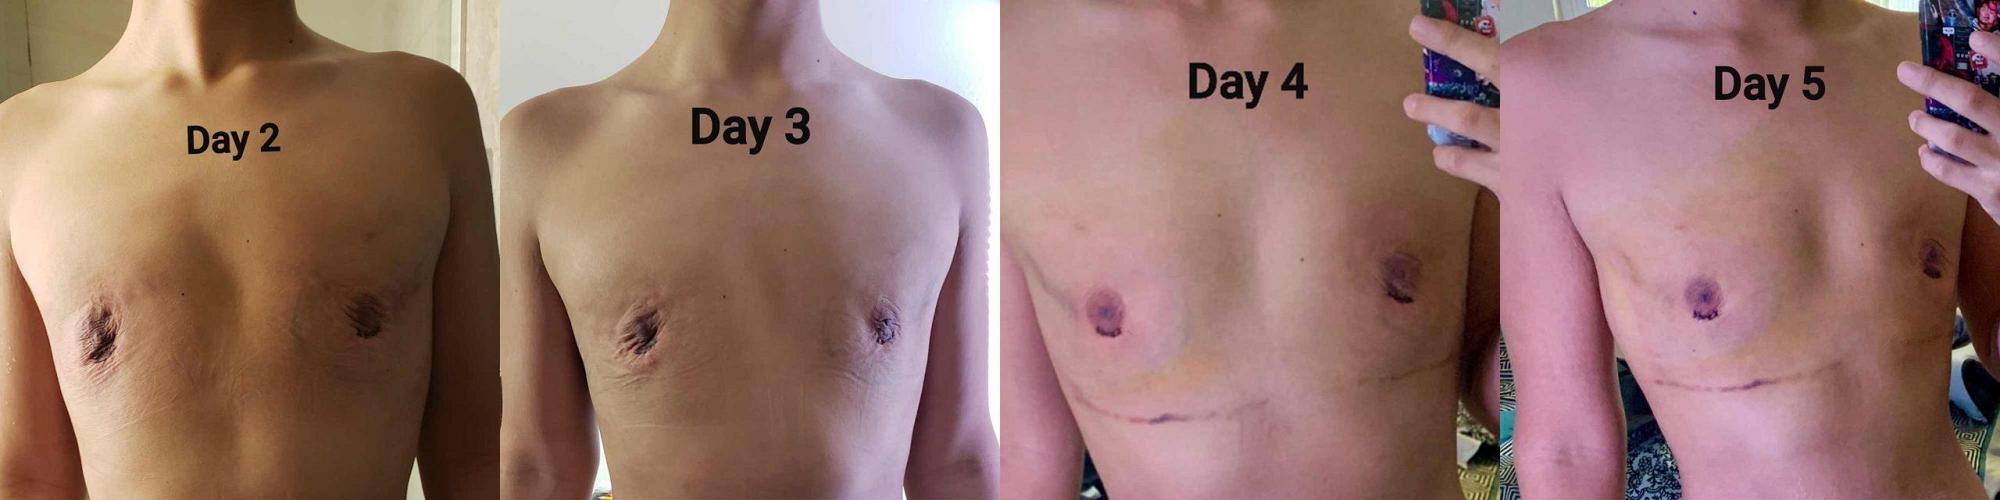 Male after 4 days after gynecomastia surgery